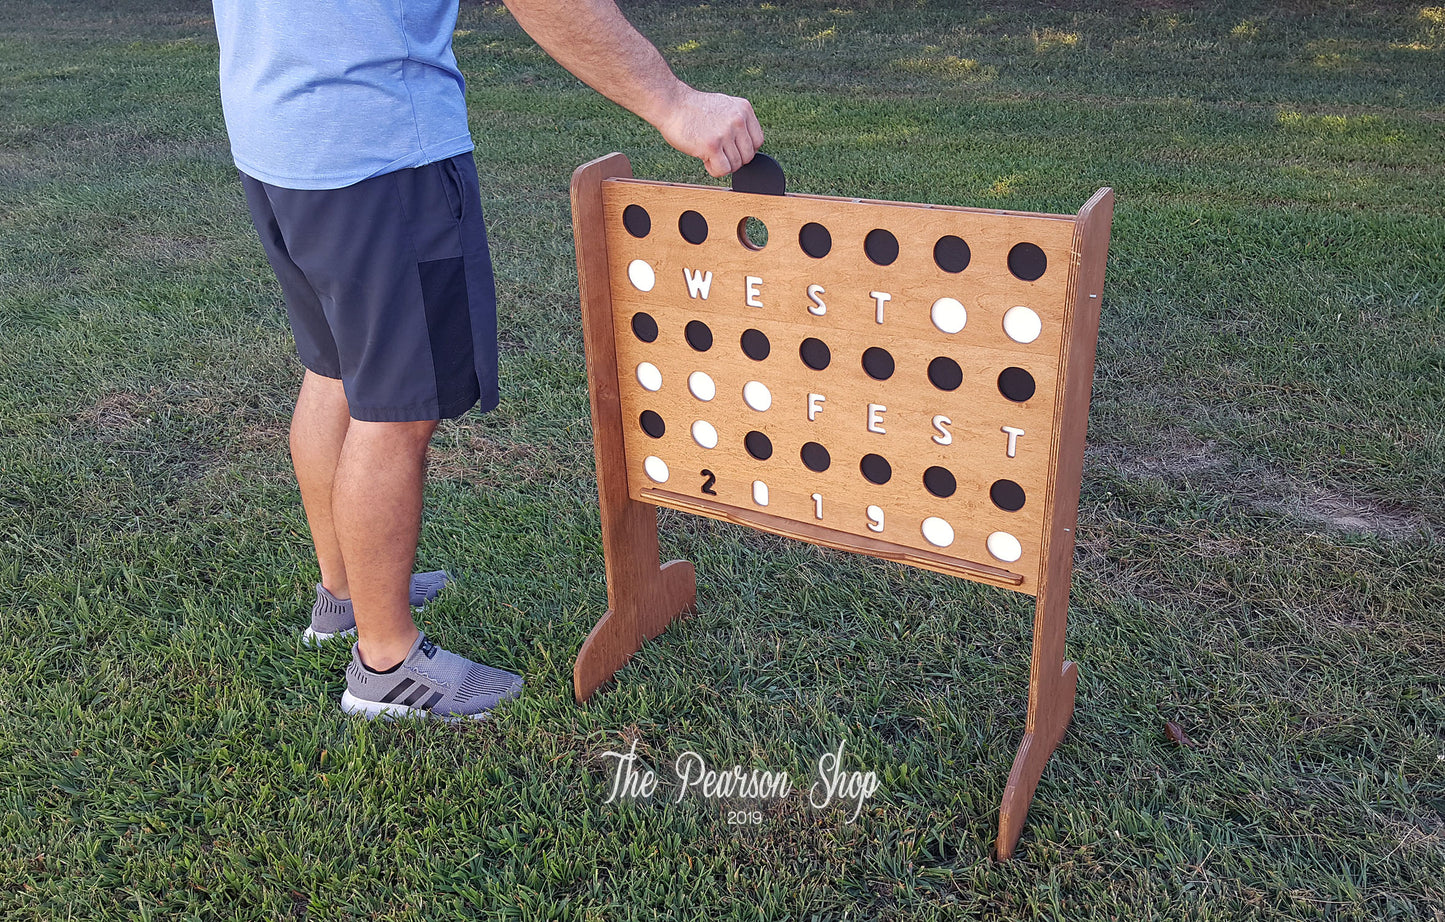 Connect 4 Giant or JR Personalized Circles Game